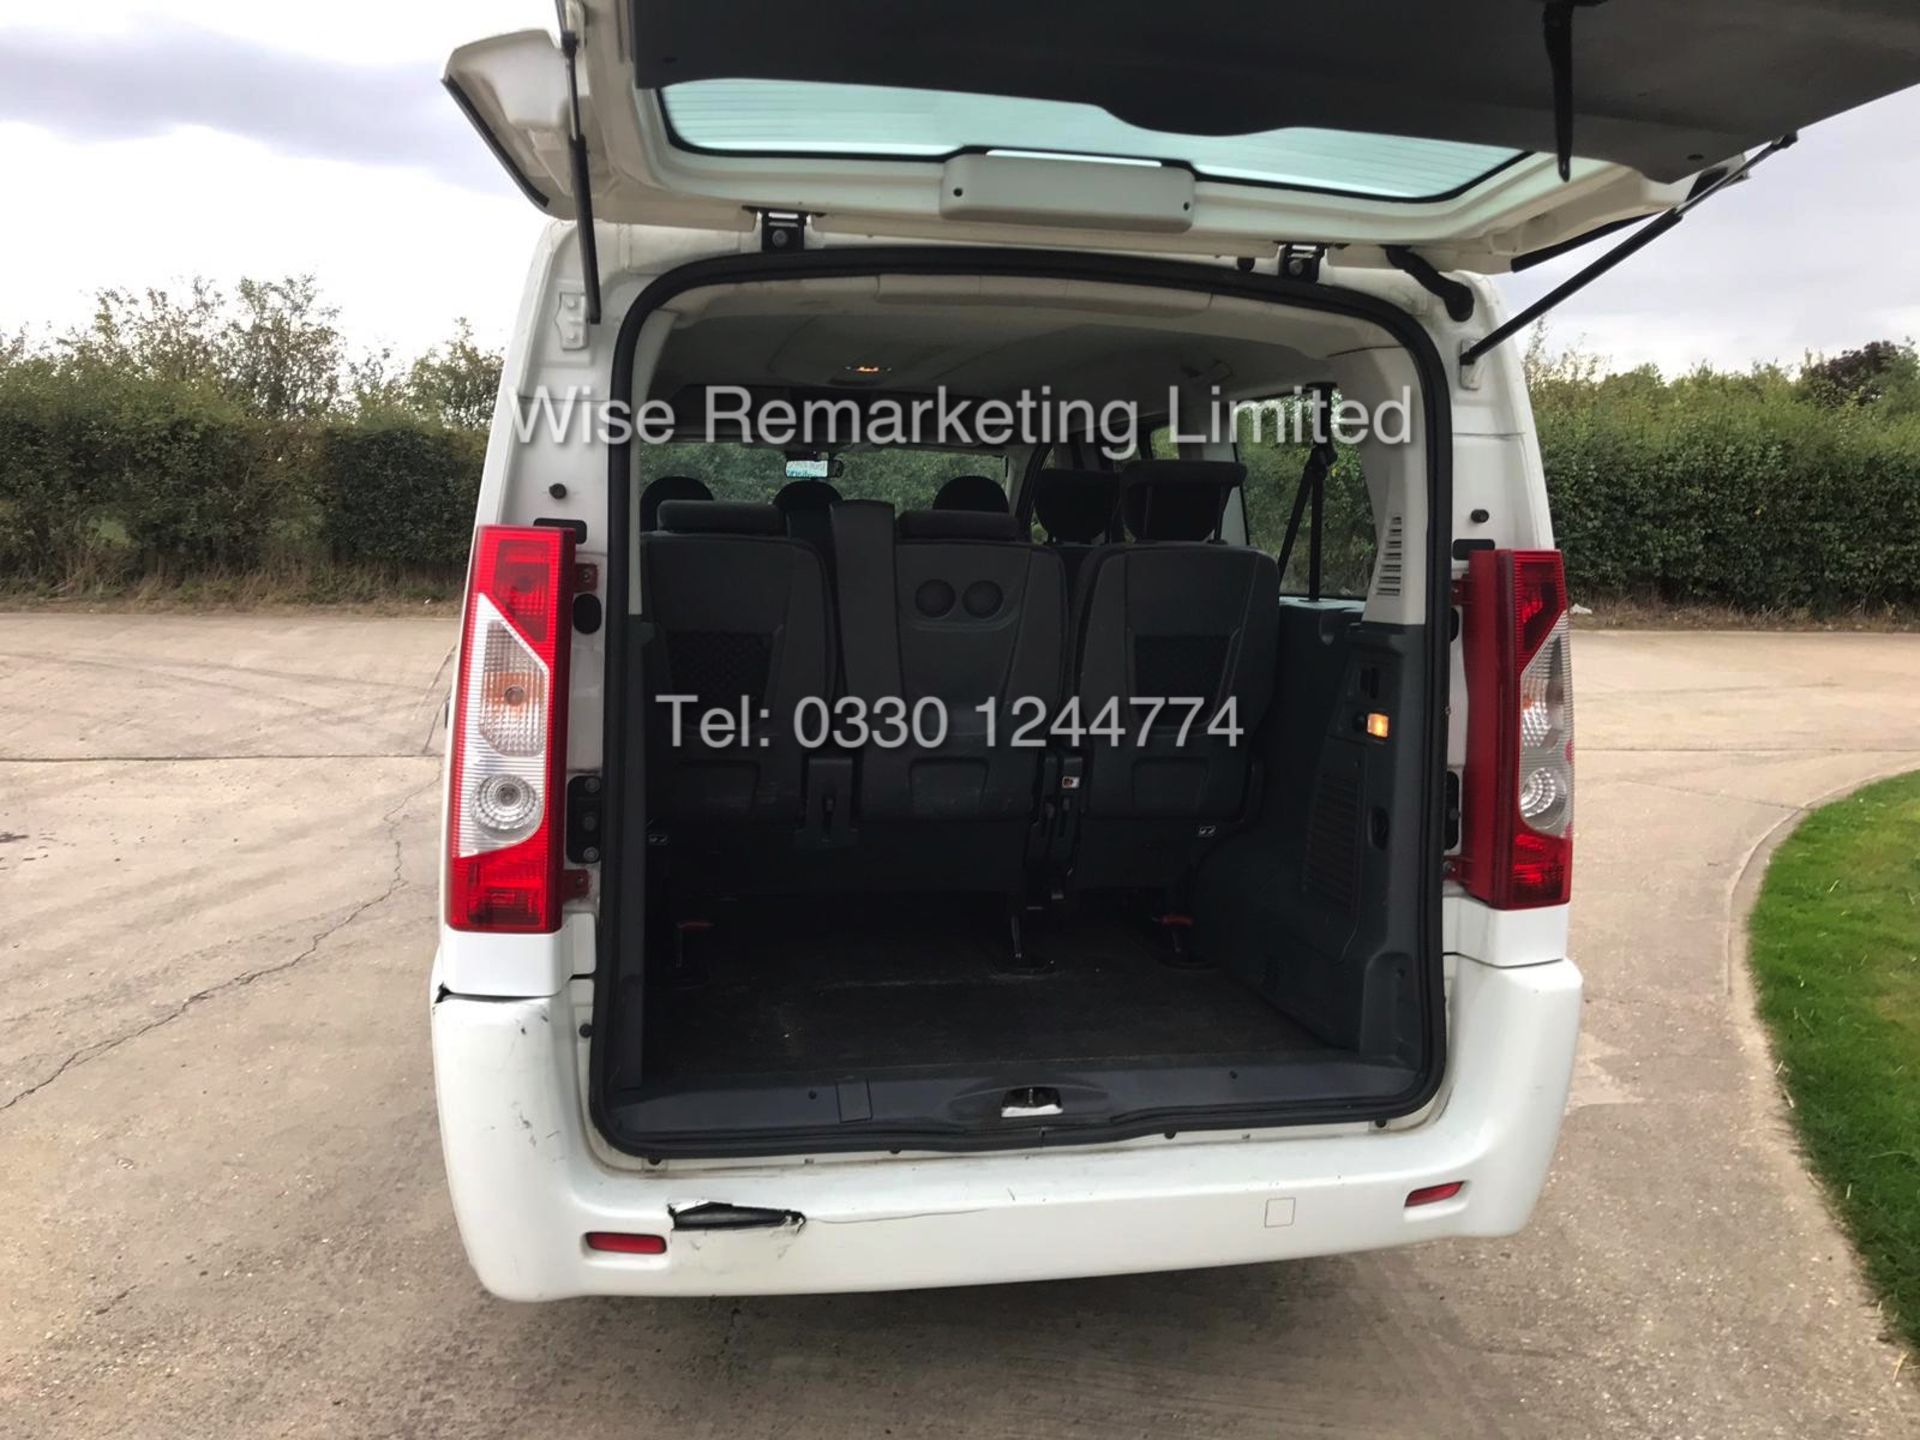 PEUGEOT EUROBUS S *MPV 8 SEATER* 2.0l (2013 - 13 REG) **AIR CON** - 1 OWNER FROM NEW - Image 7 of 19